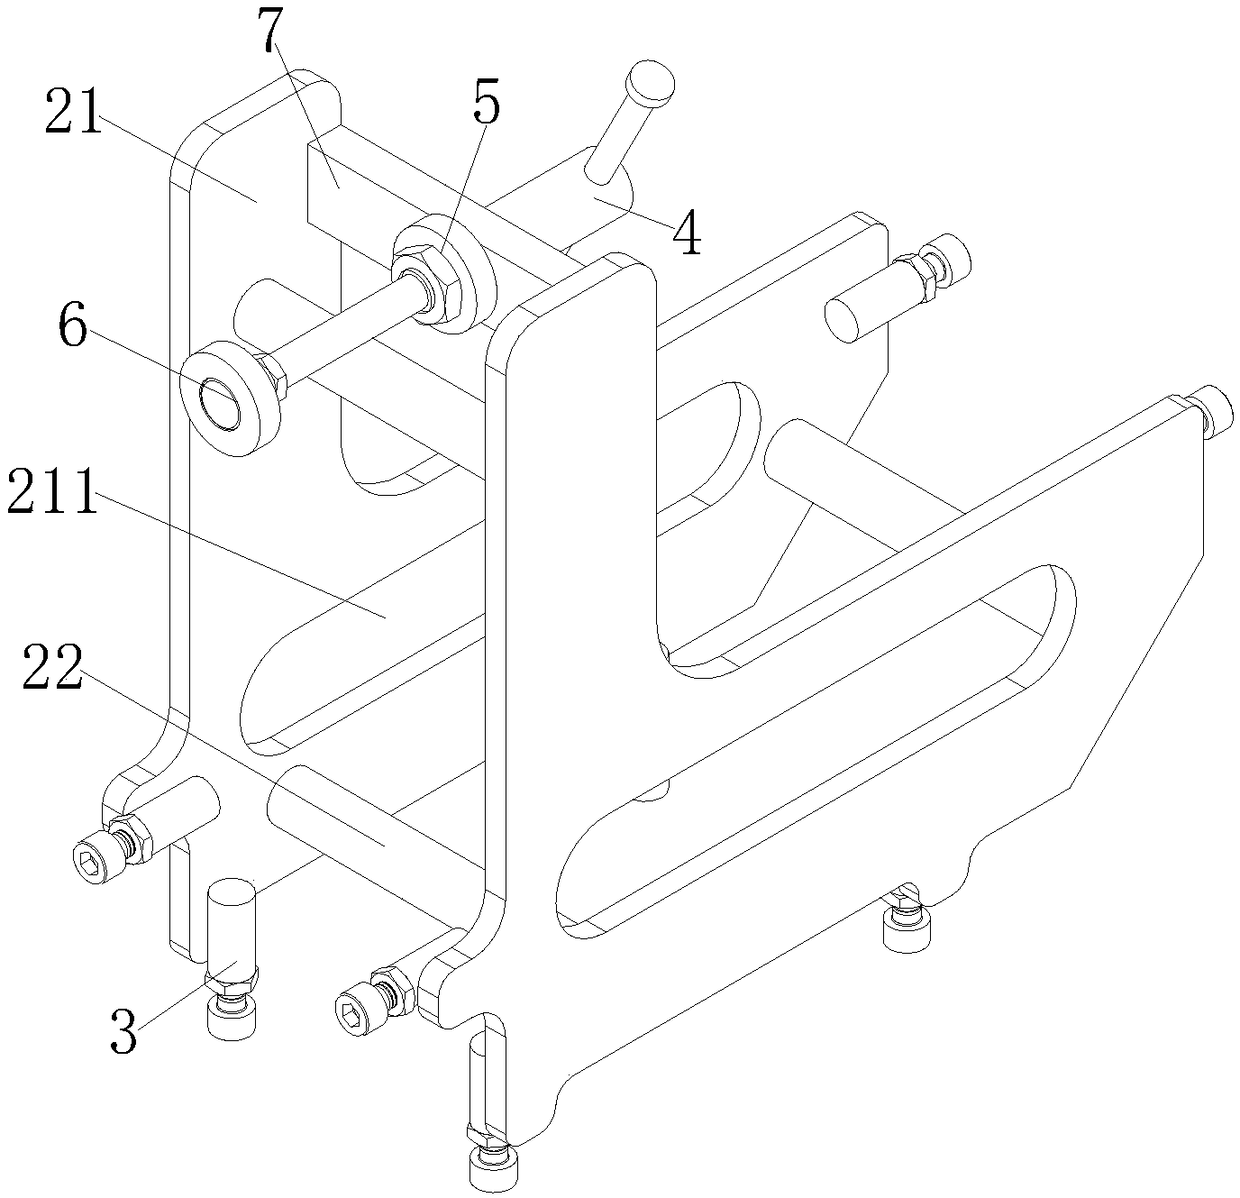 Positioning tool for forklift pedal assembly assembling and welding